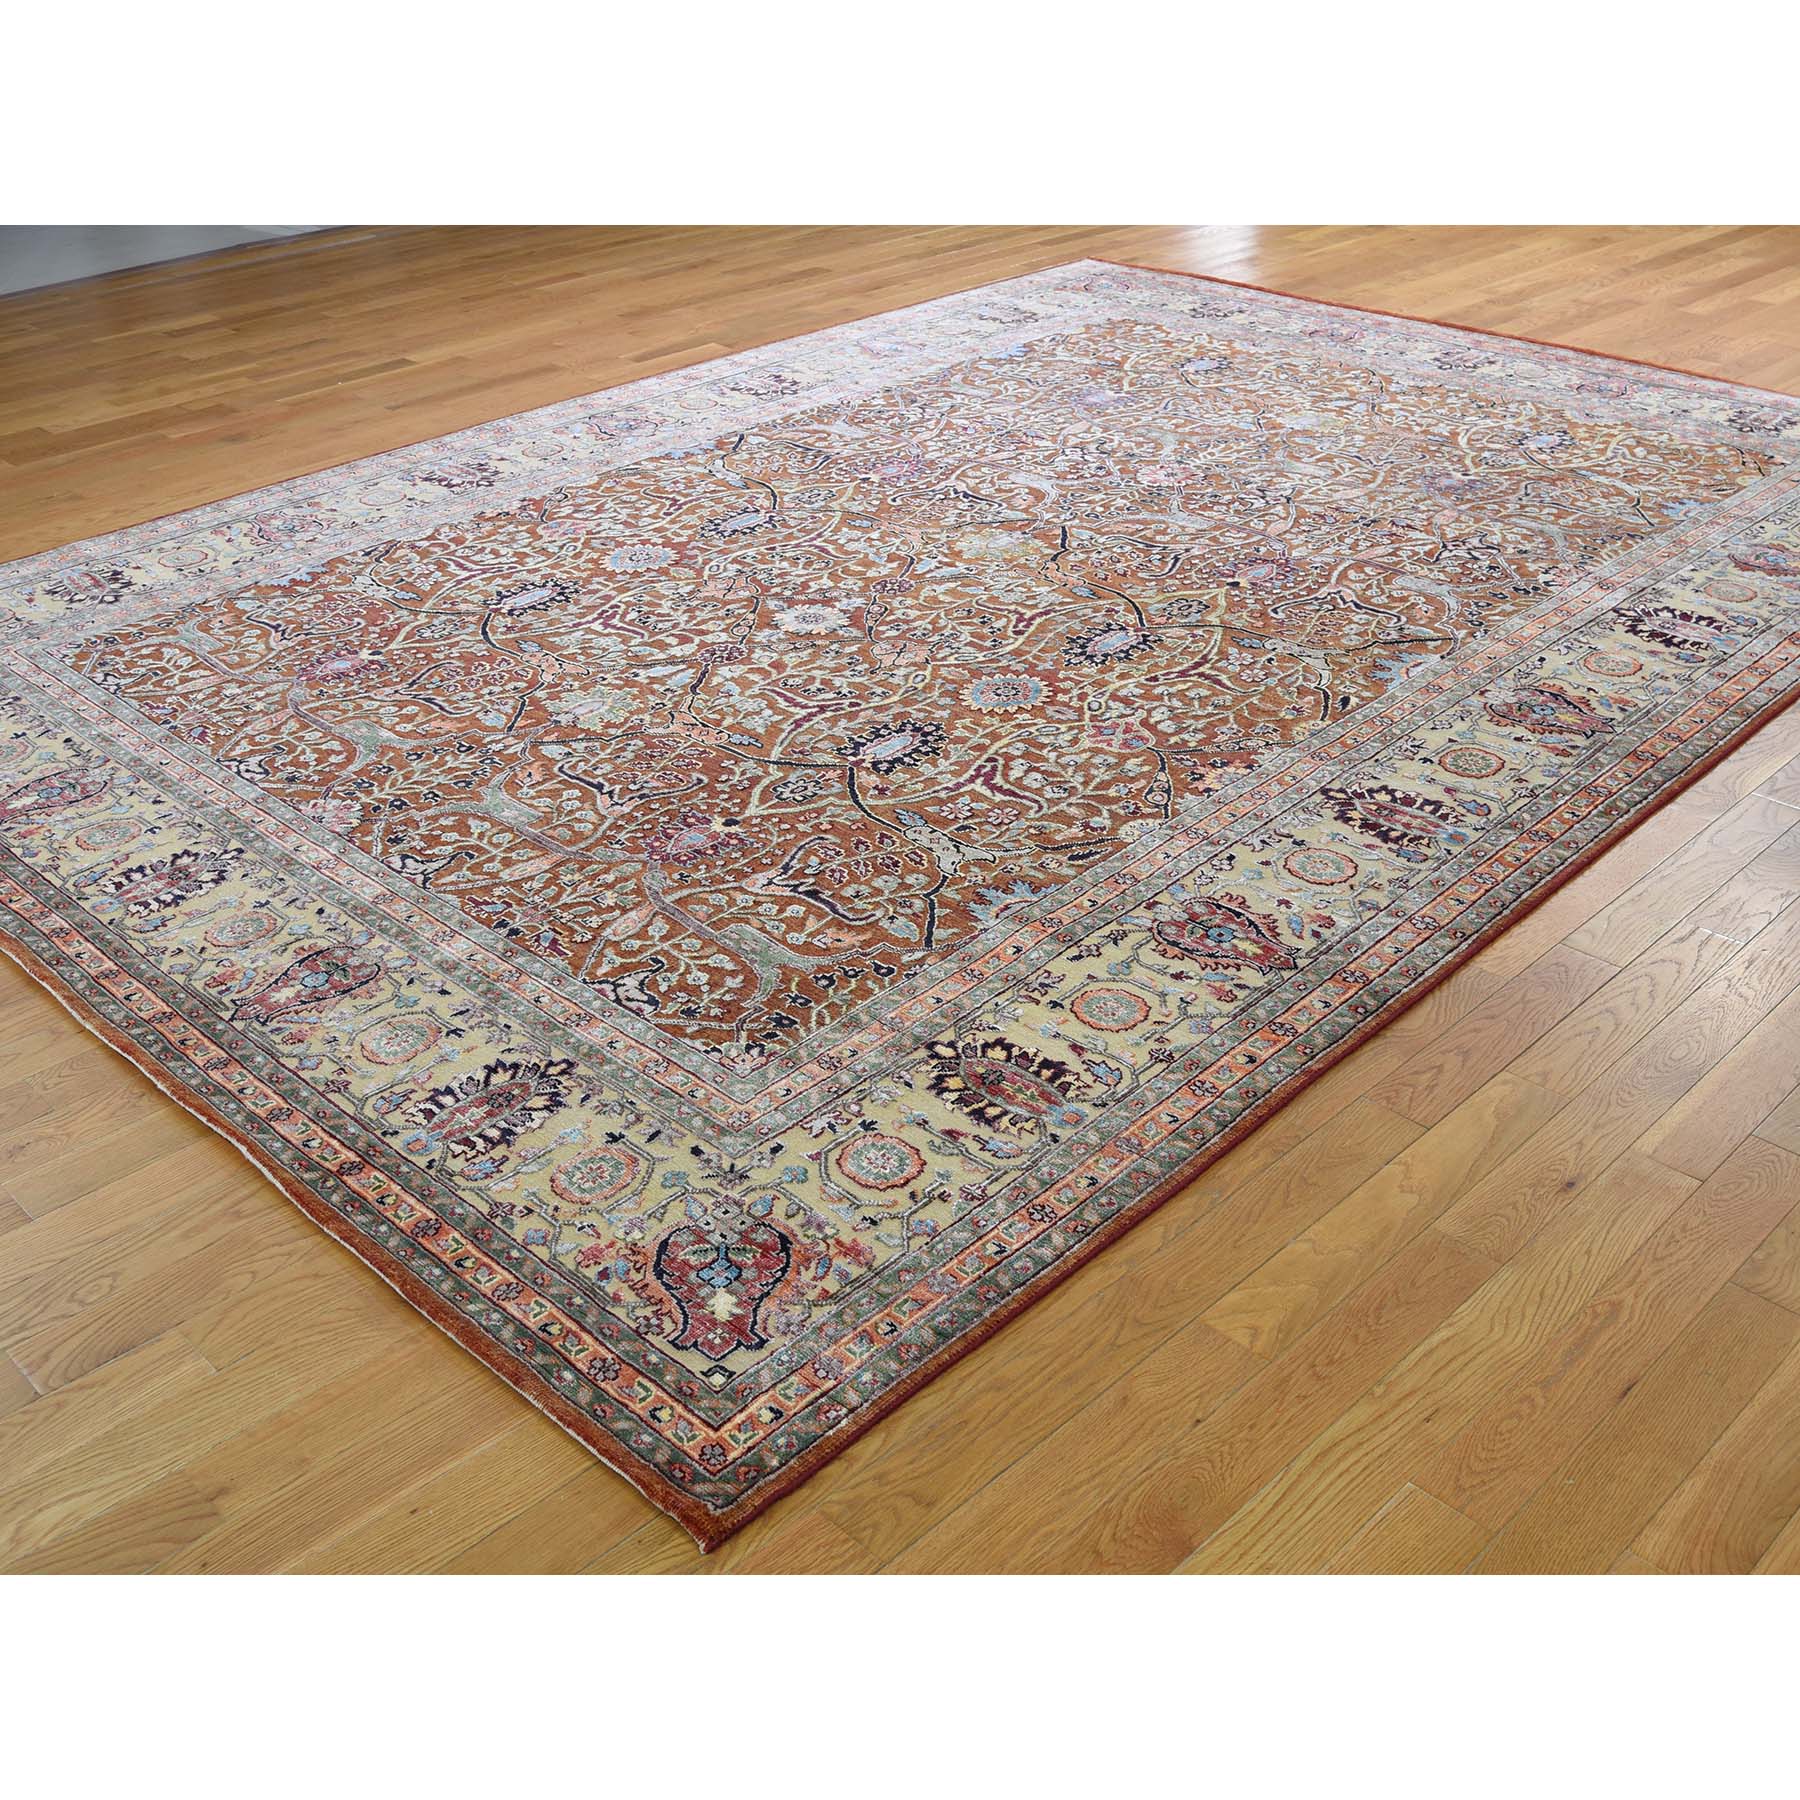 8-10 x12-4  Oushak Design Silk WIth Textured Wool Hand-Knotted Oriental Rug 